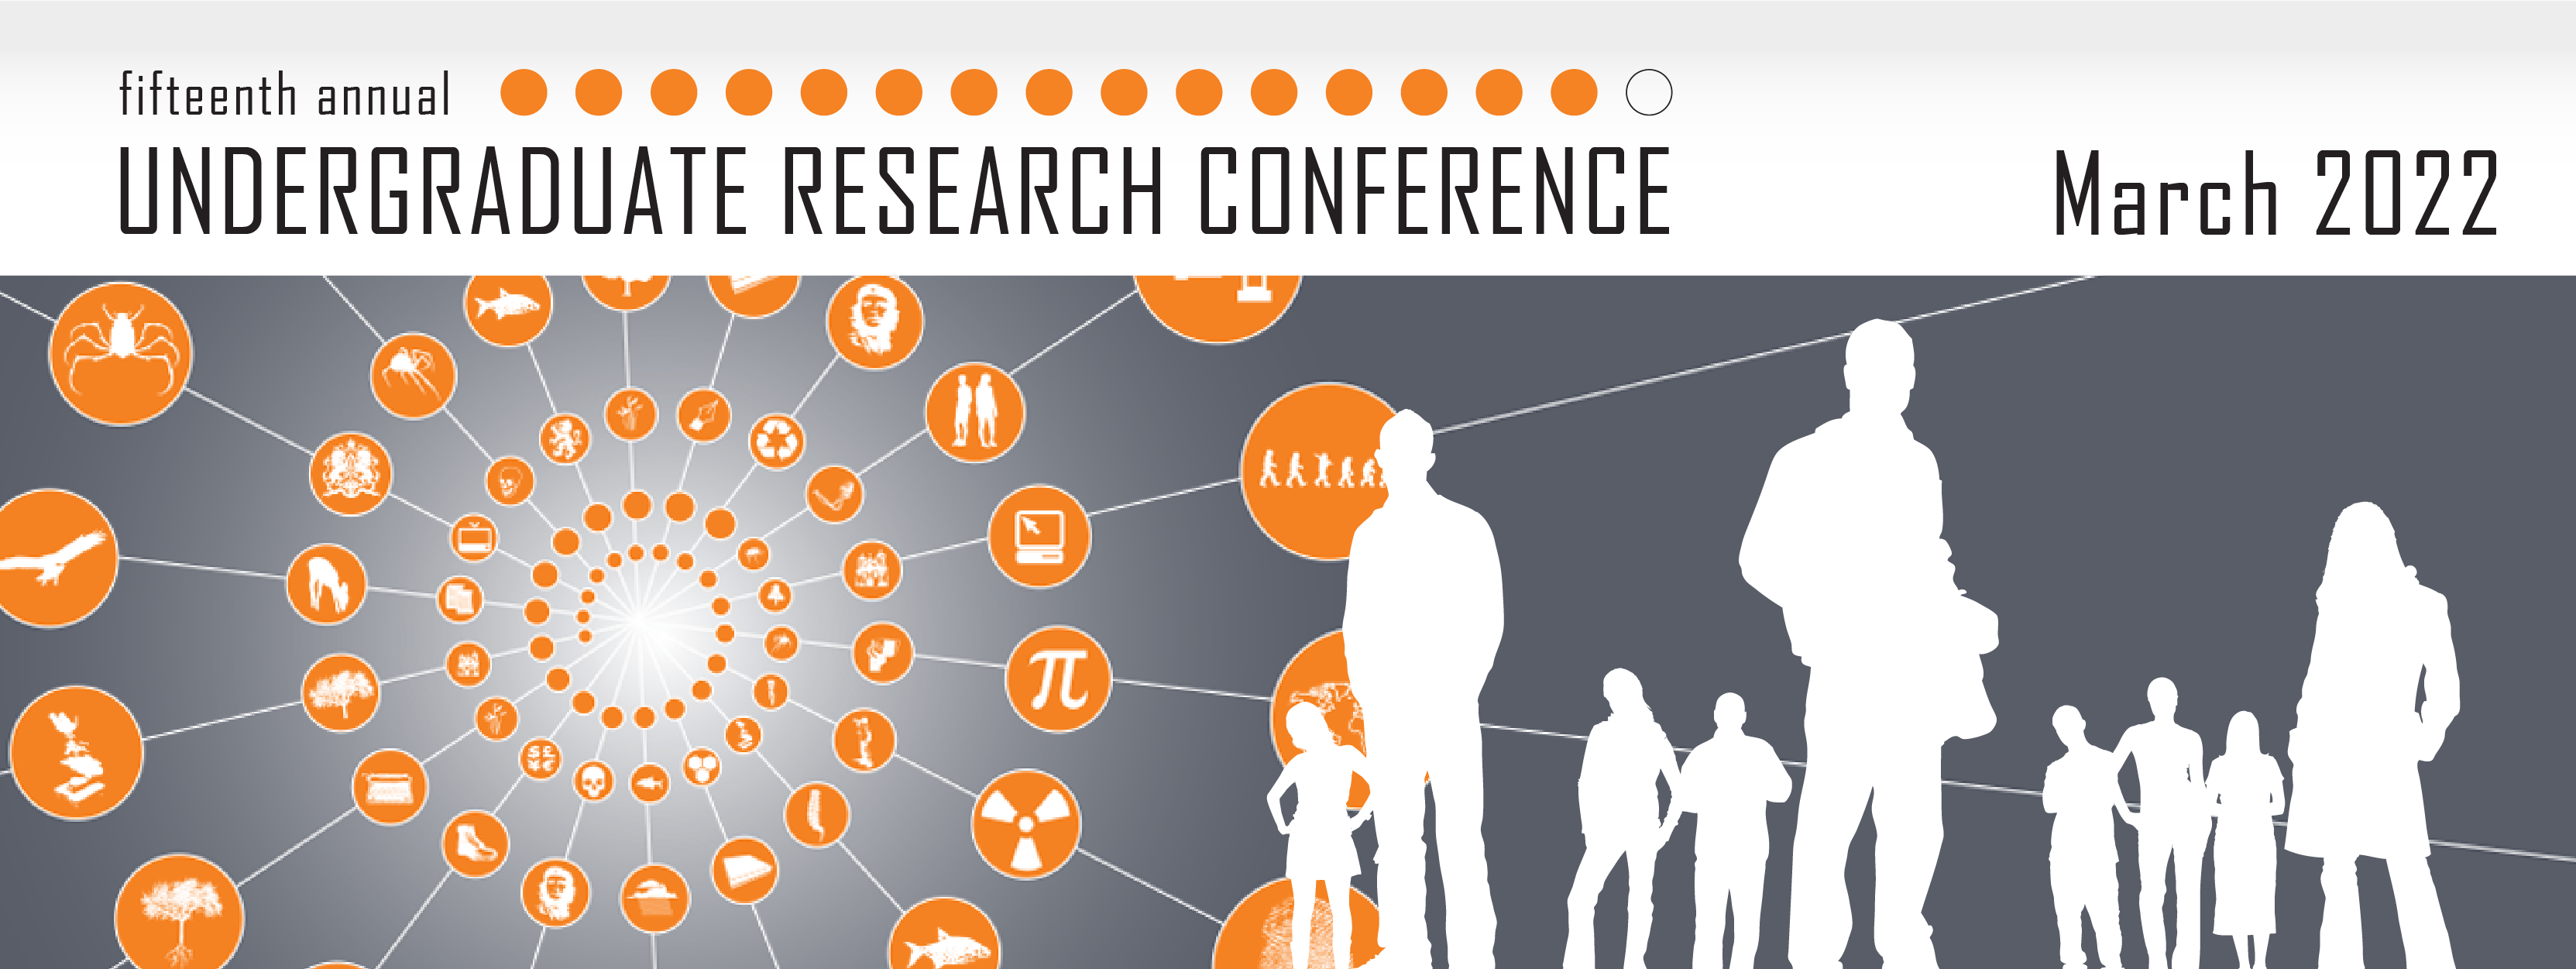 Undergraduate Research Conference March 2022